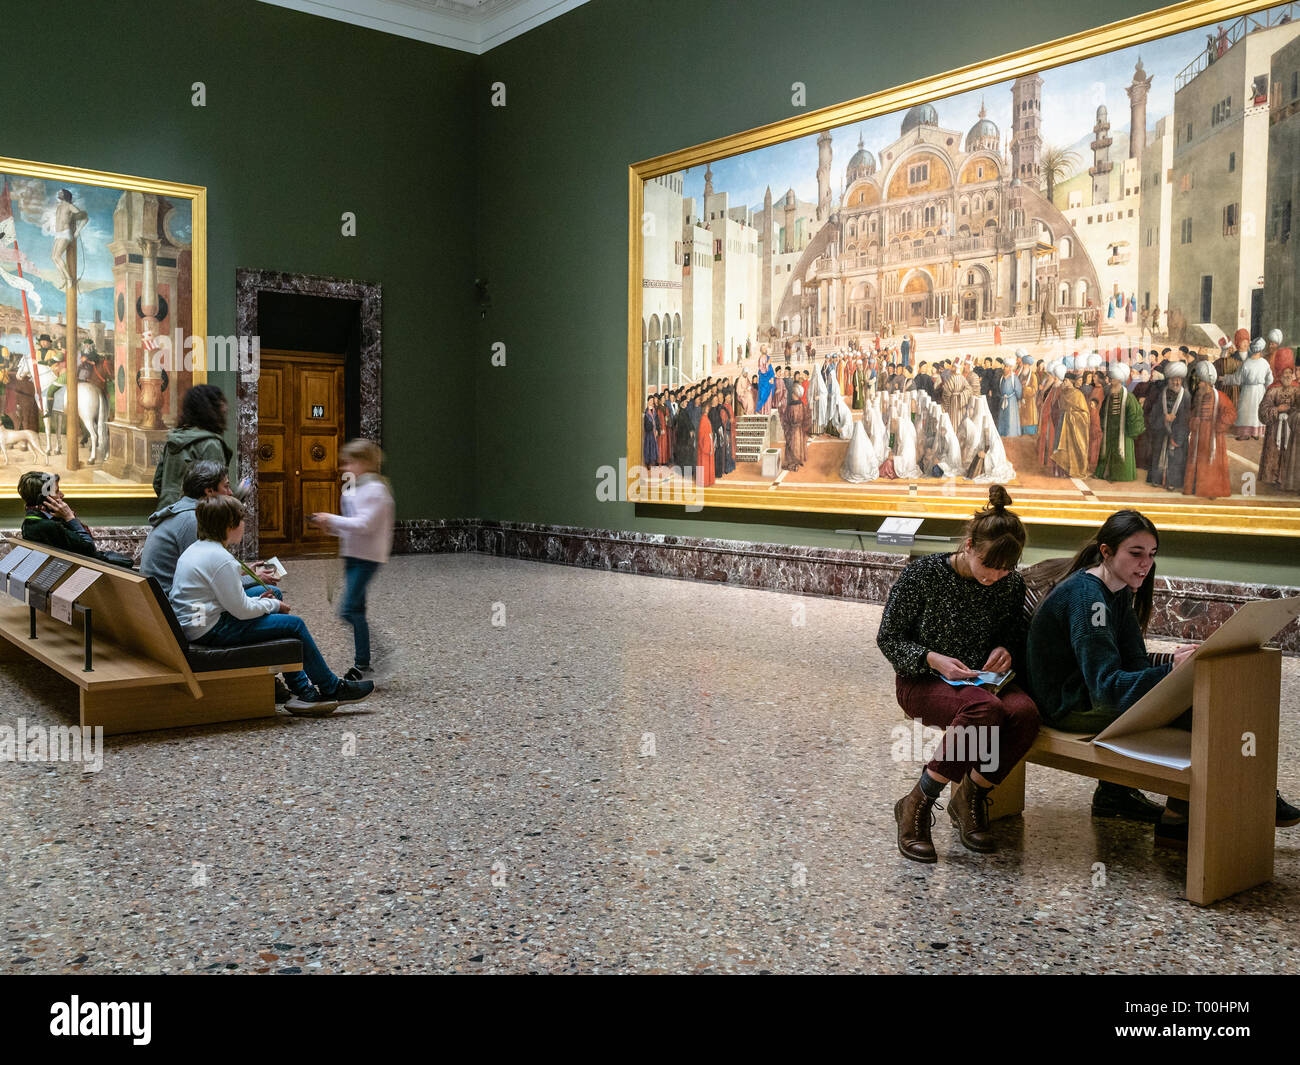 MILAN, ITALY - FEBRUARY 24, 2019: students in hall in Pinacoteca di Brera (Brera Art Gallery) in Milan. The Brera is national picture gallery of ancie Stock Photo